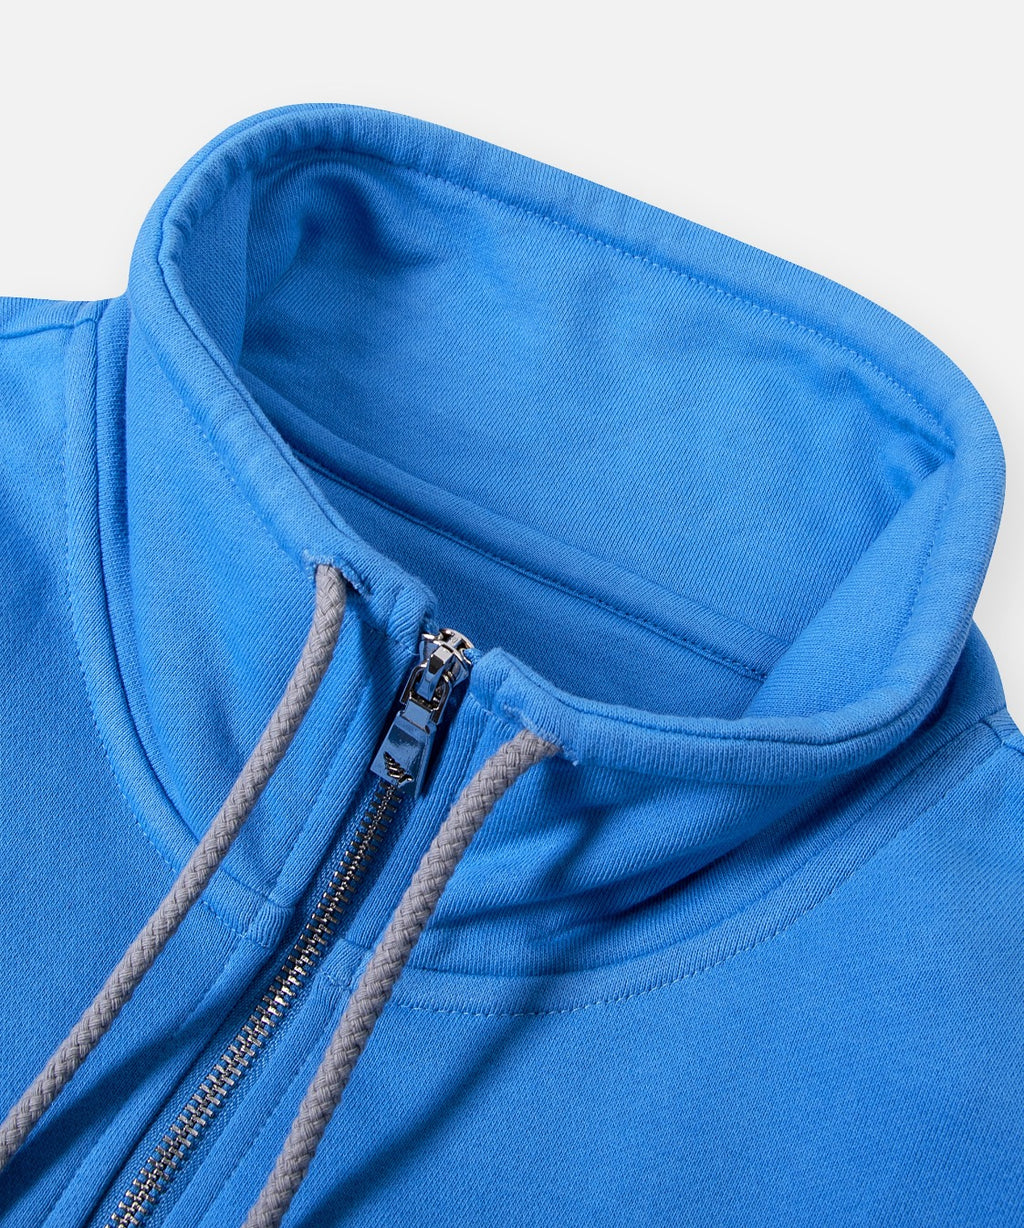  Funnel neck with drawcord and zippered opening on Paper Planes Open Hem Half Zip Sweatshirt, color Azure Blue.